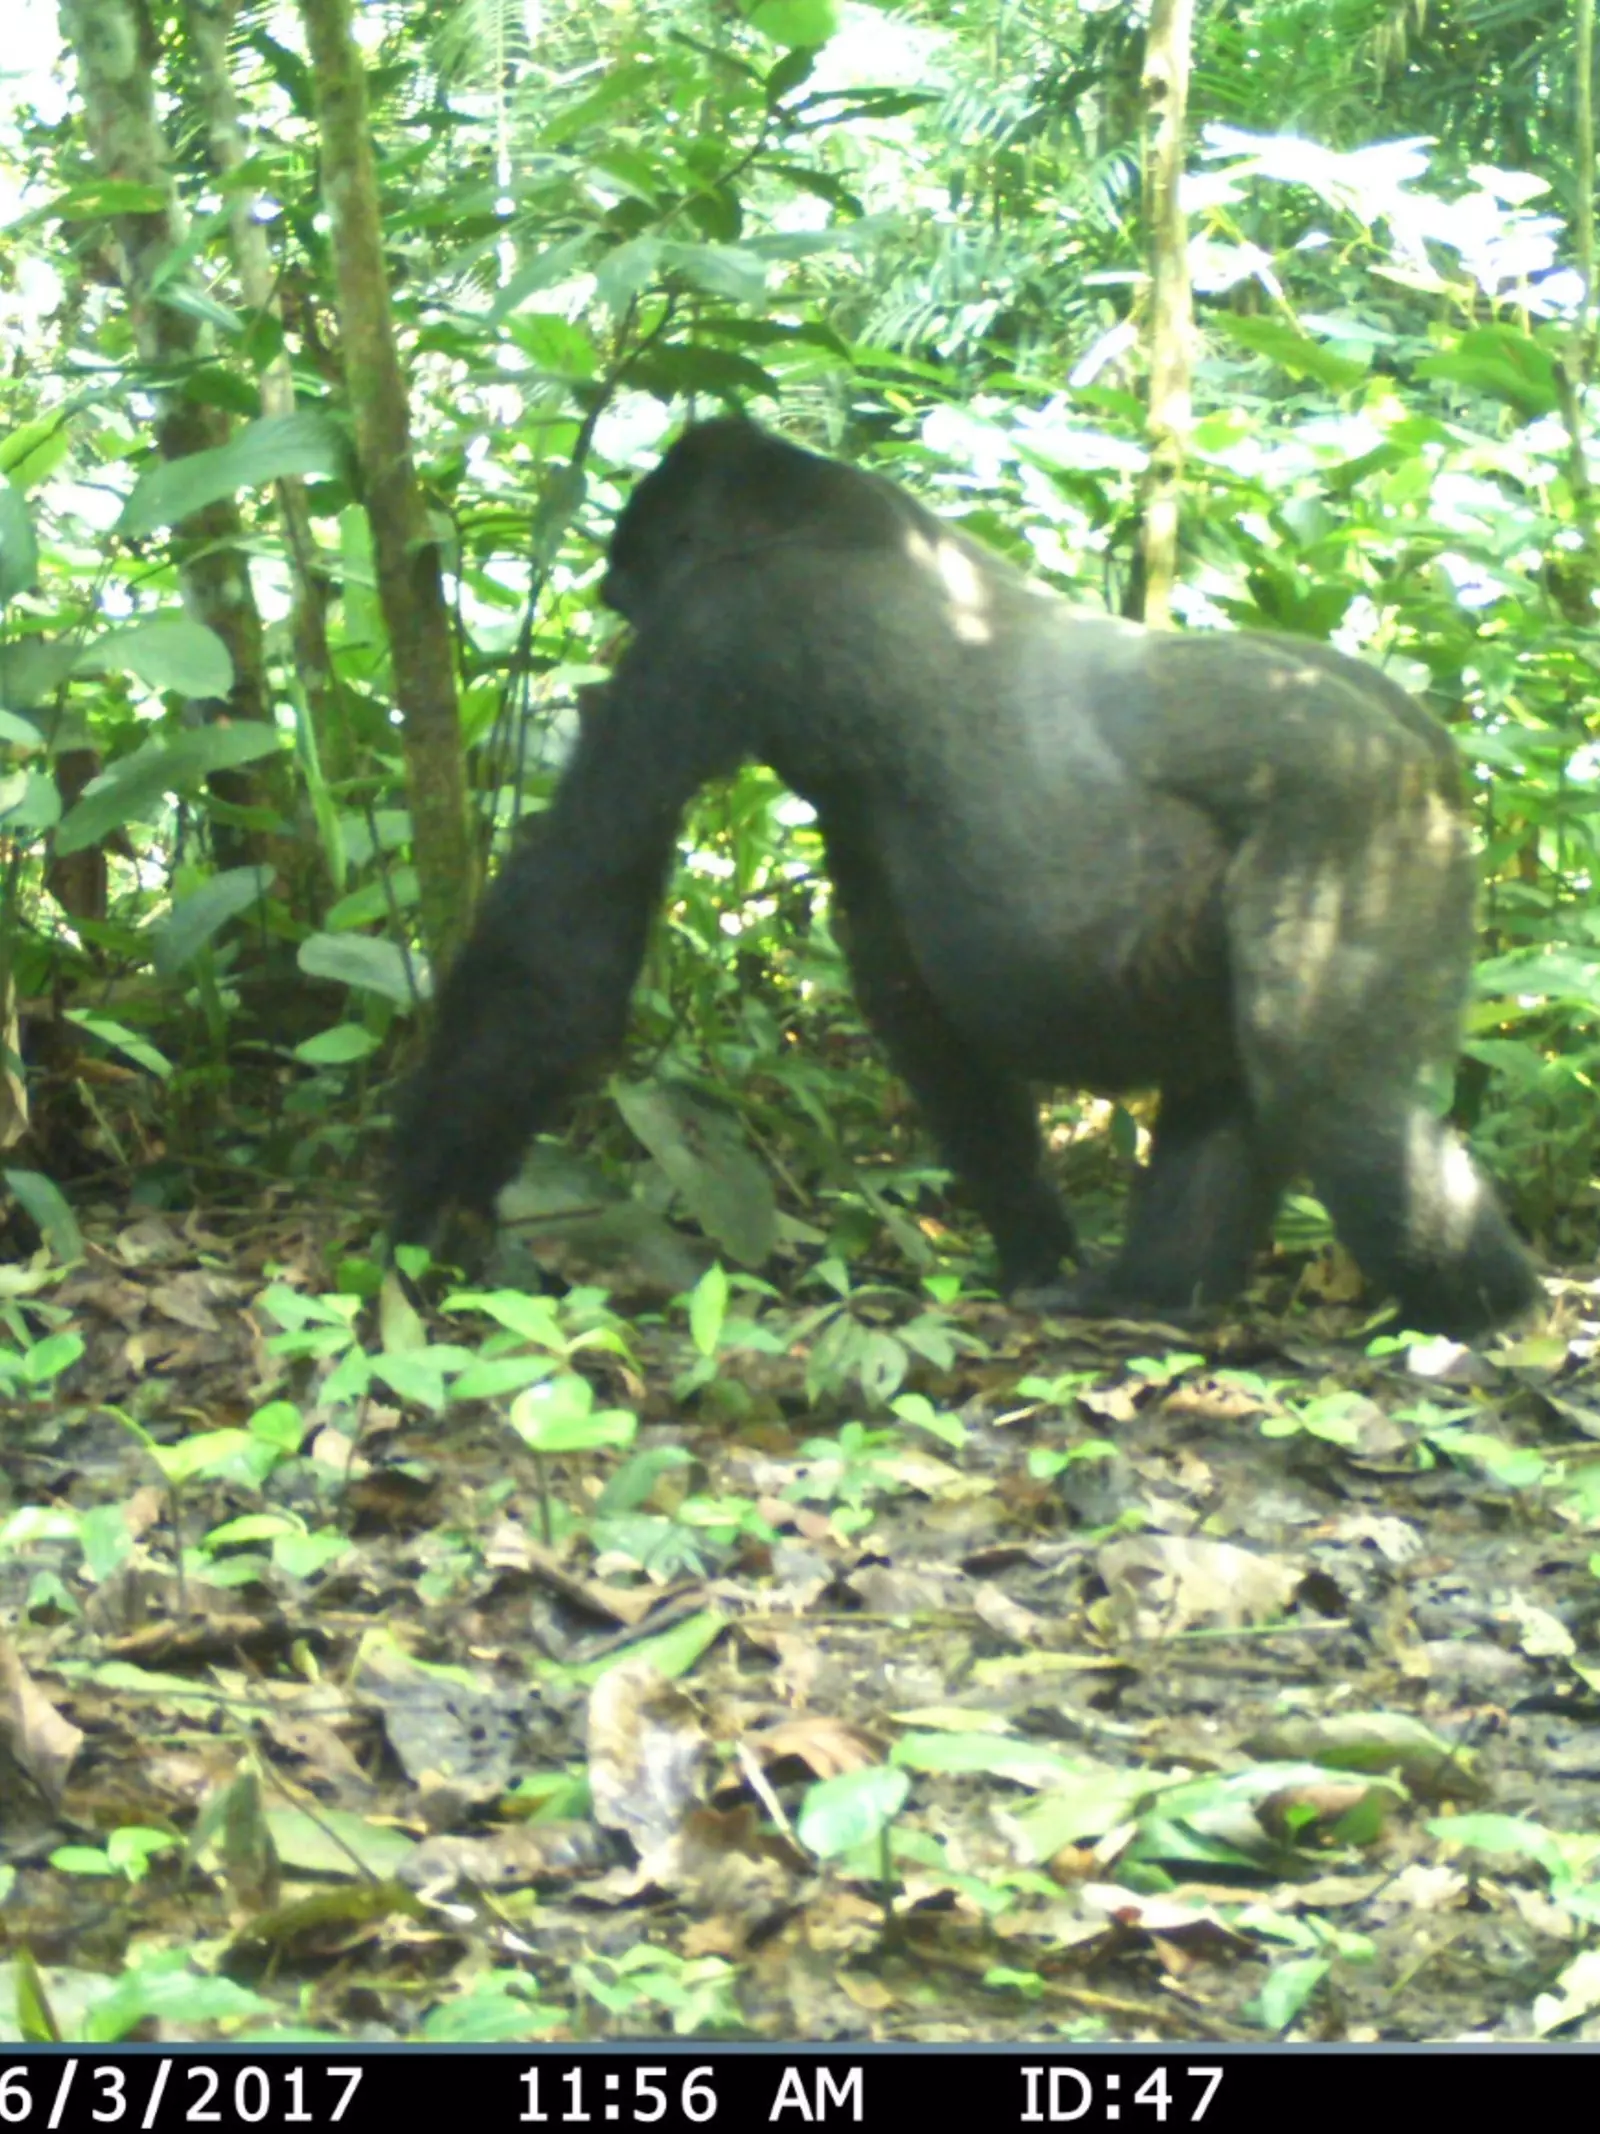 A camera trap image of a gorilla in a forest